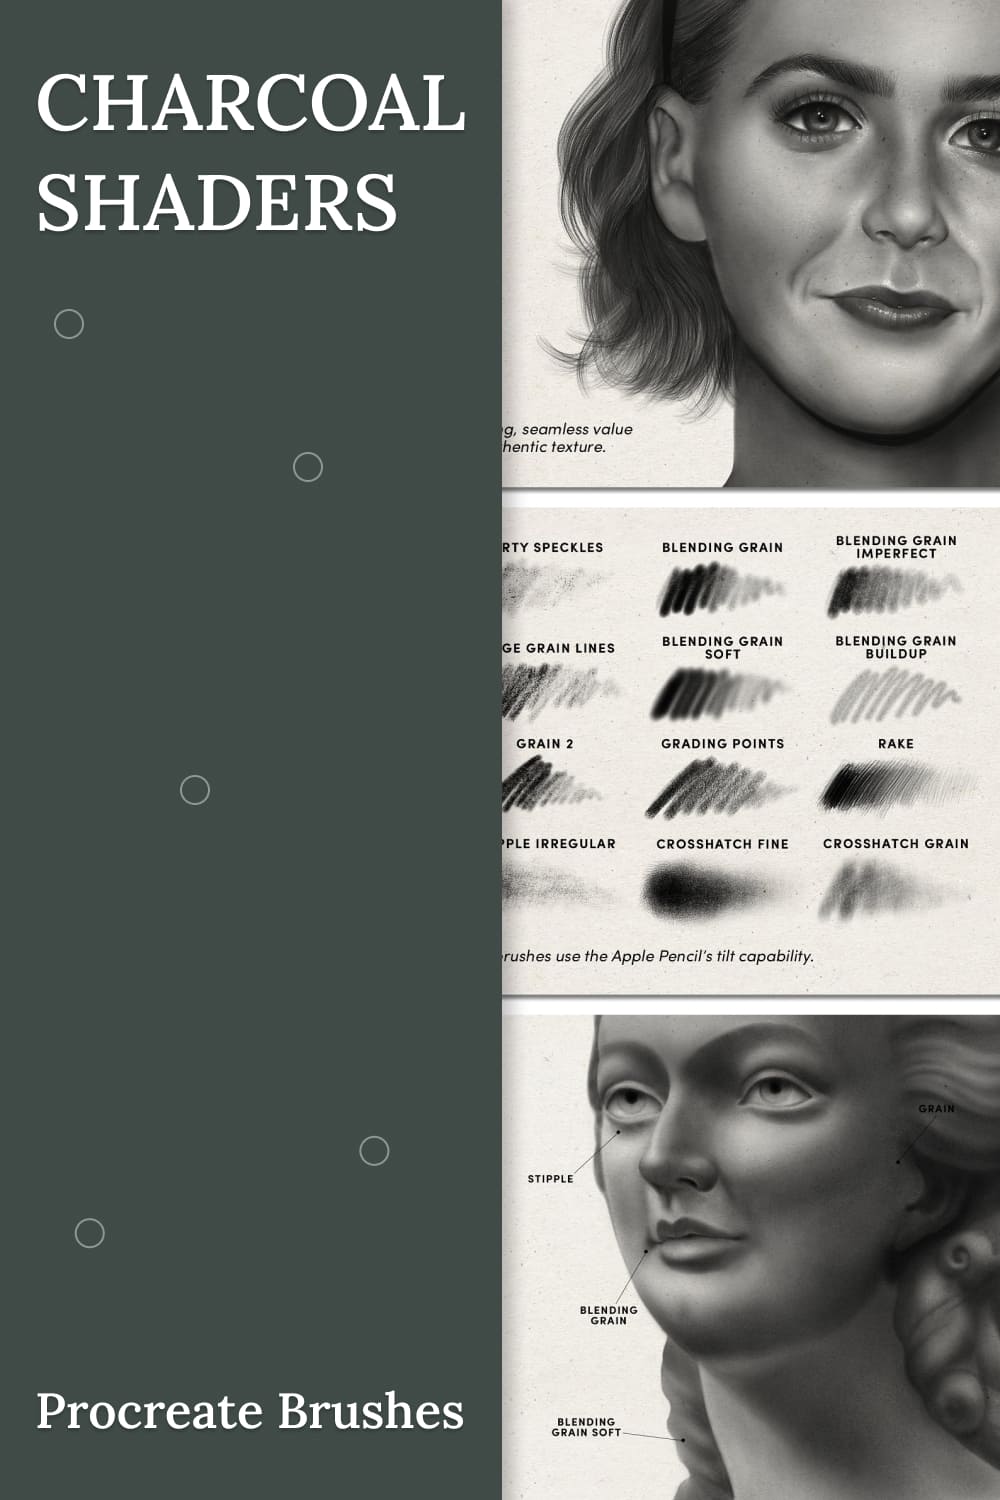 Charcoal shaders – procreate brushes, picture for pinterest 1000x1500.